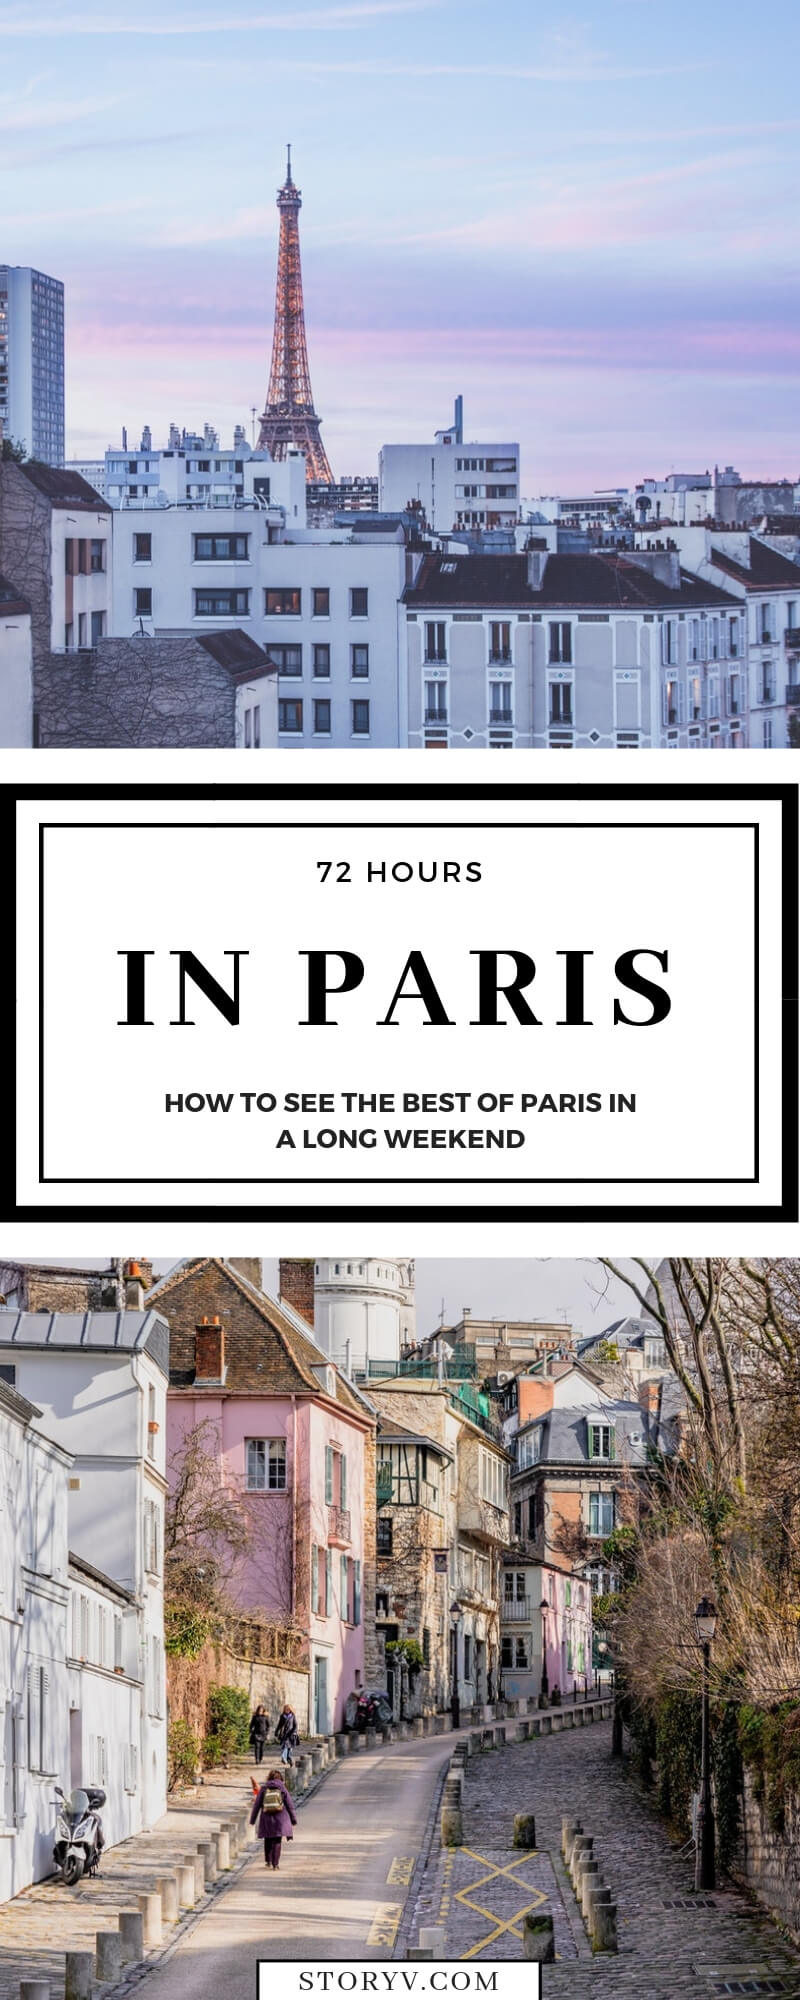 Long weekend coming up & thinking about visiting Paris? Here's how to plan 72 hours in Paris without missing out on the best (& most unique) things it has to offer.